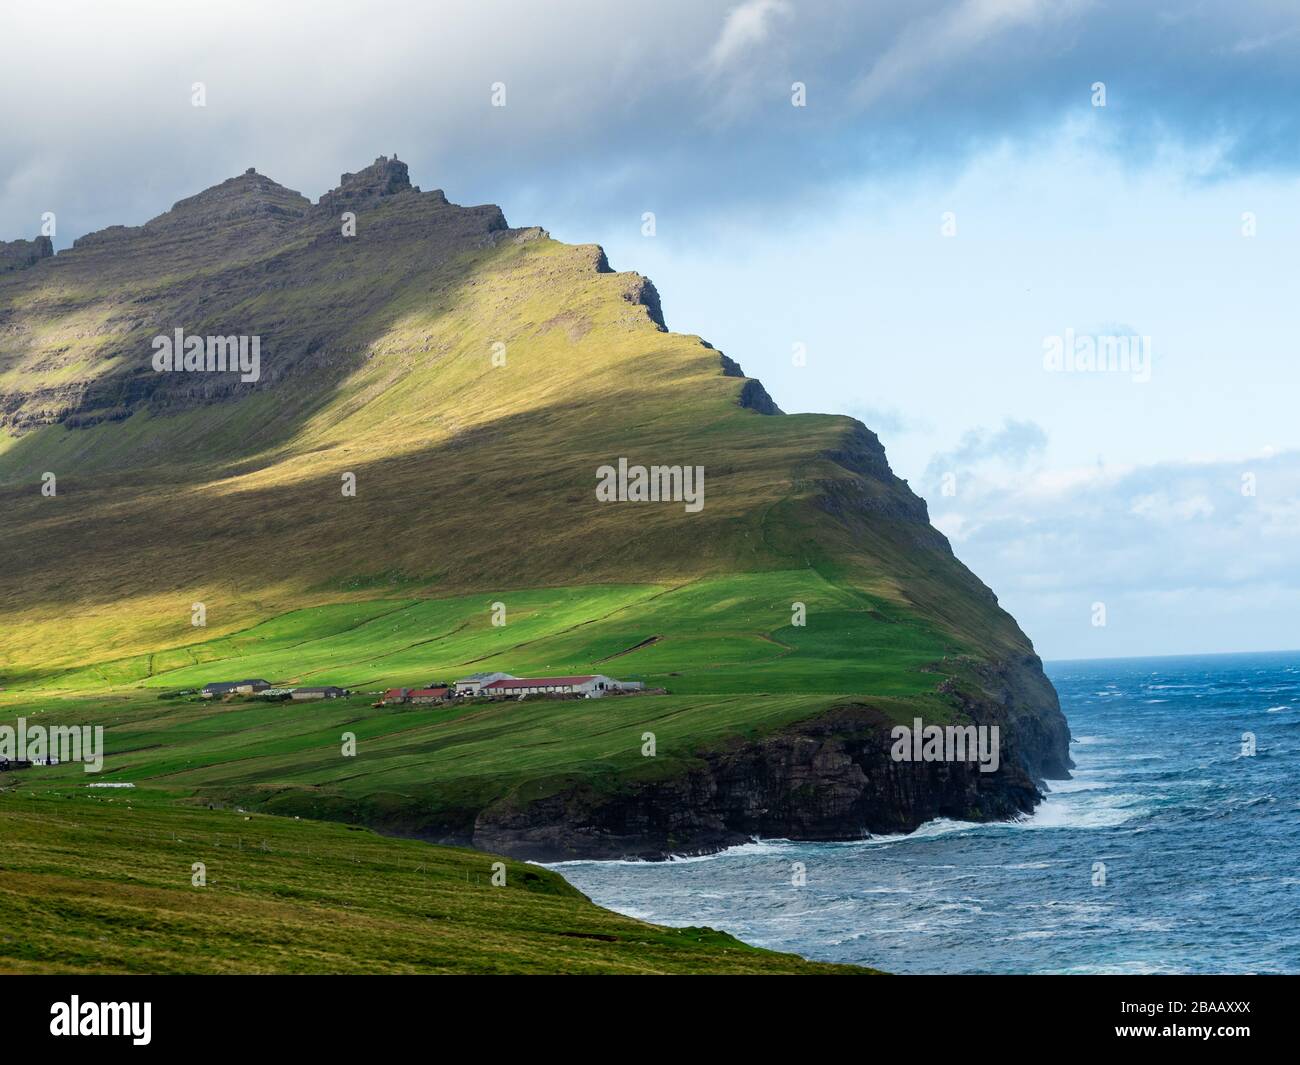 Faroe Islands, Viðoy, Viðareiði. Spectacular view on cliffs and green hills above the village. Blue sky with some while clouds. Stock Photo